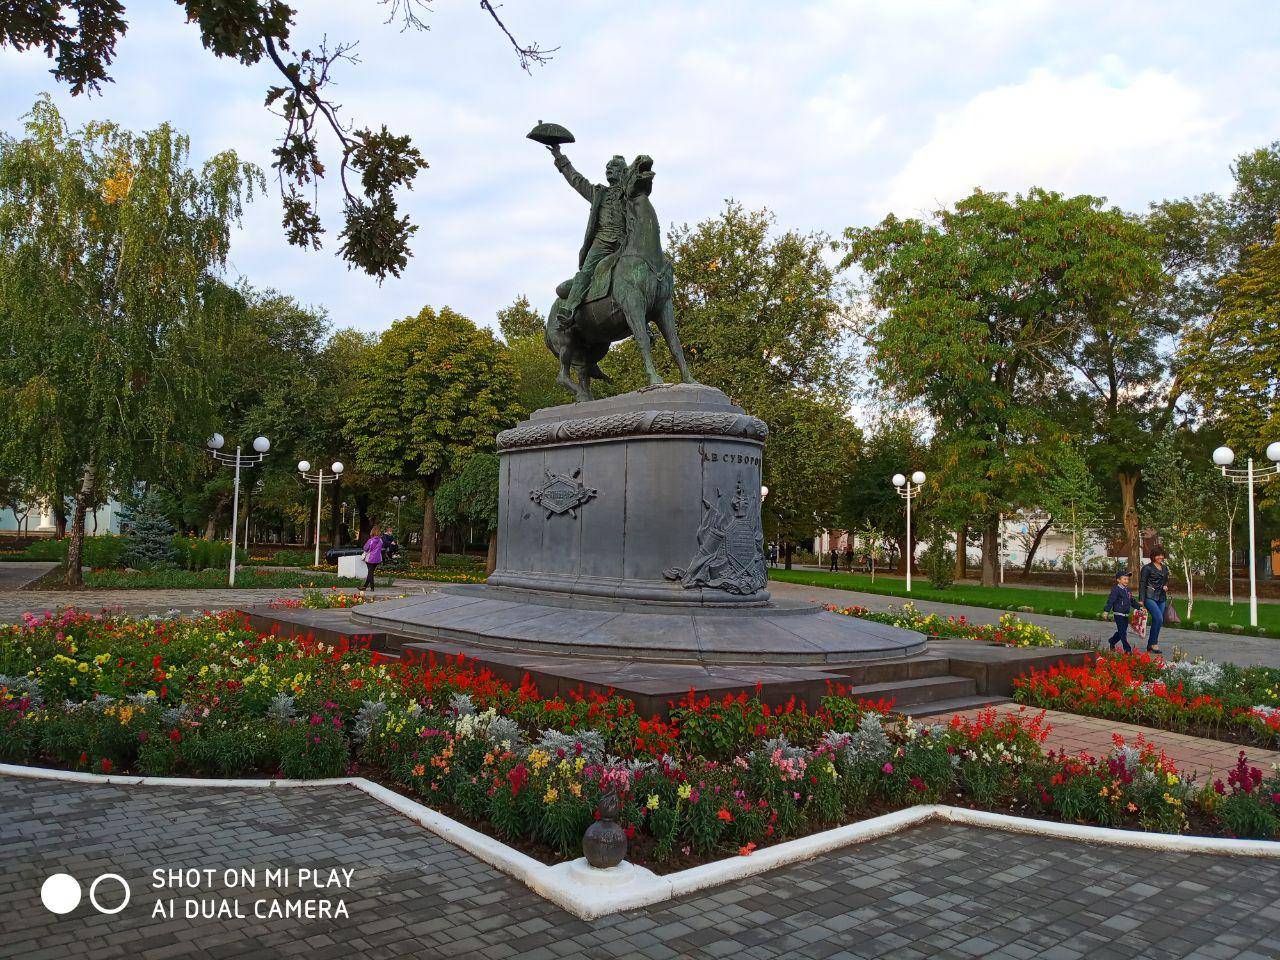 Monument to the winner Suvorov in Izmail